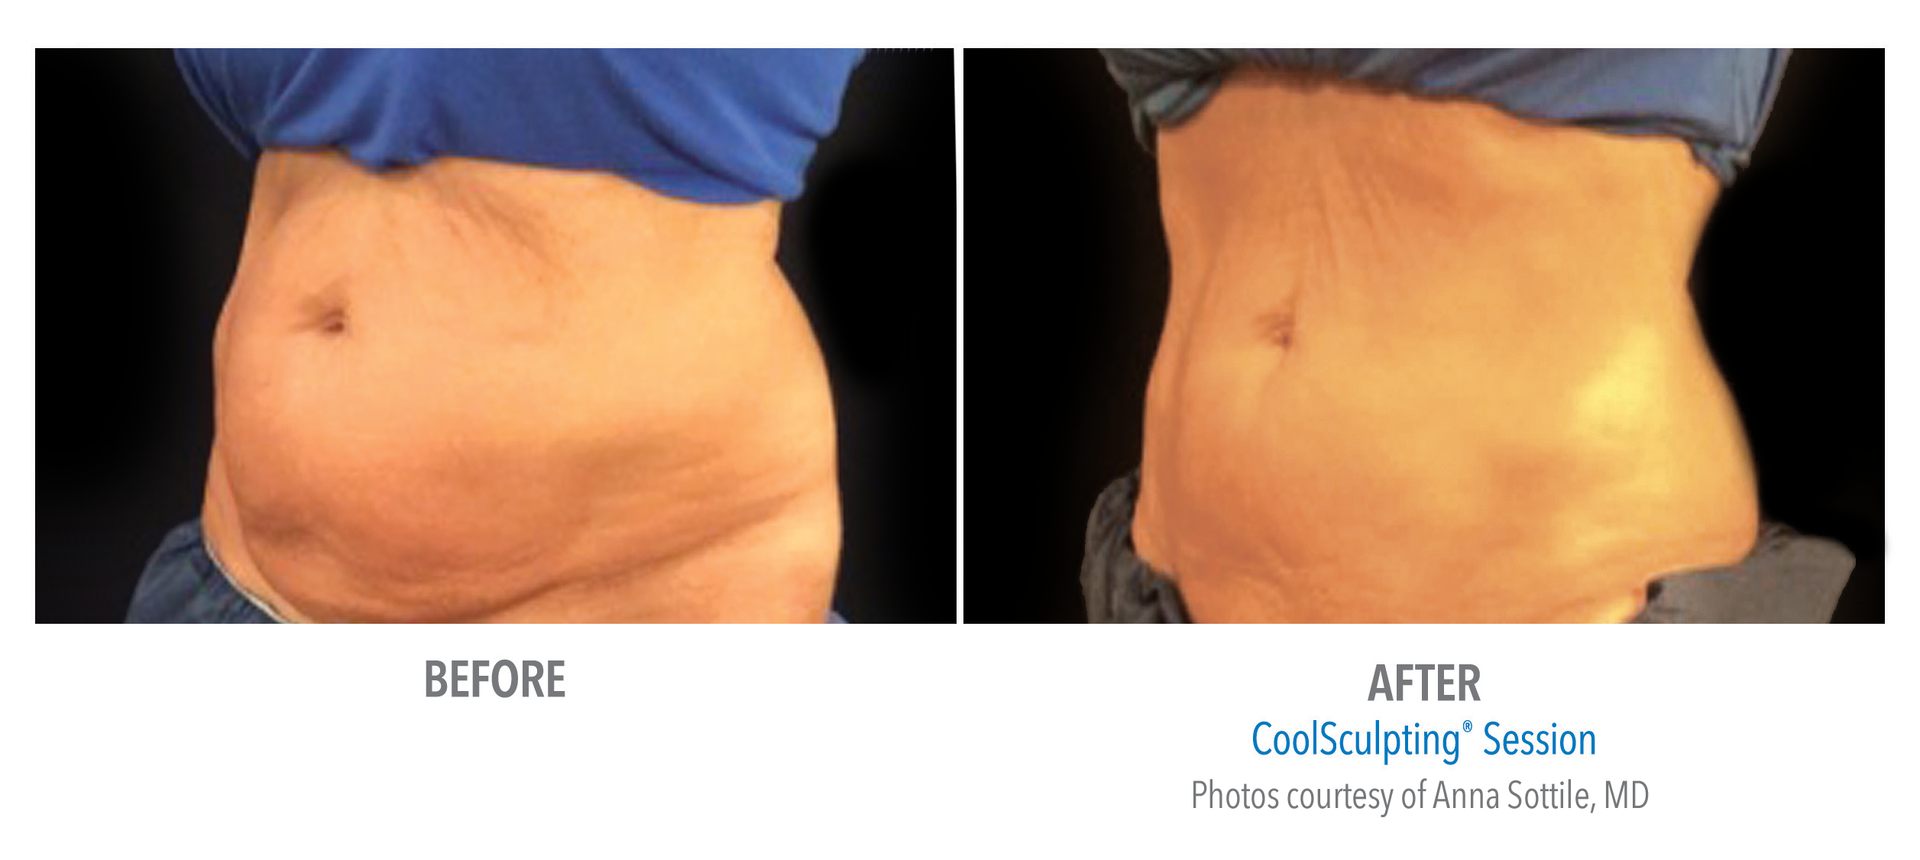 The Aesthetic Ine Institute Of Miami Offers Coolsculpting For Women And Men Who Exercise Eat Right But Still Can T Shed Stubborn Fat That